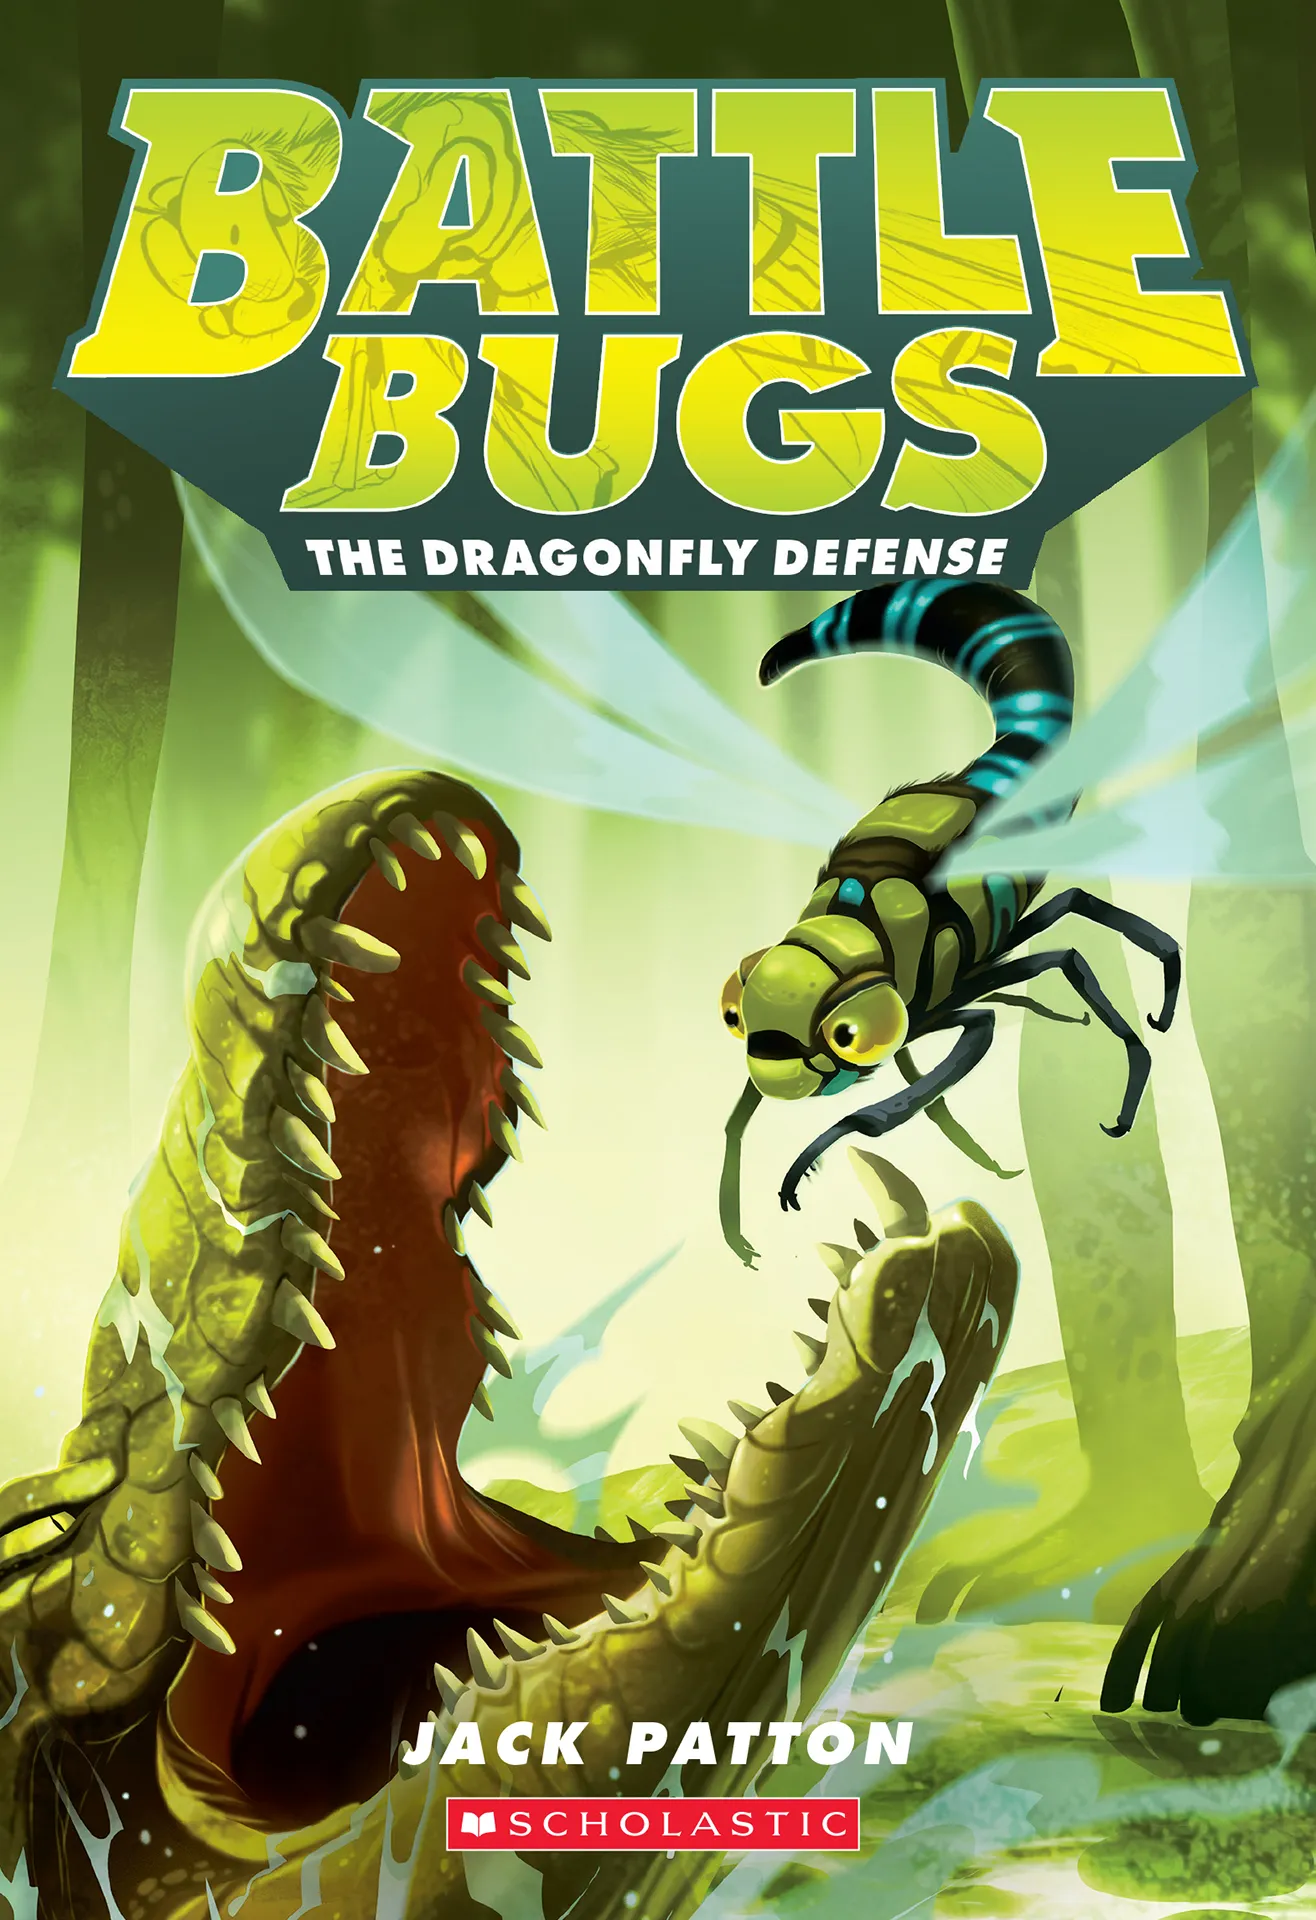 The Dragonfly Defense (Battle Bugs #7)